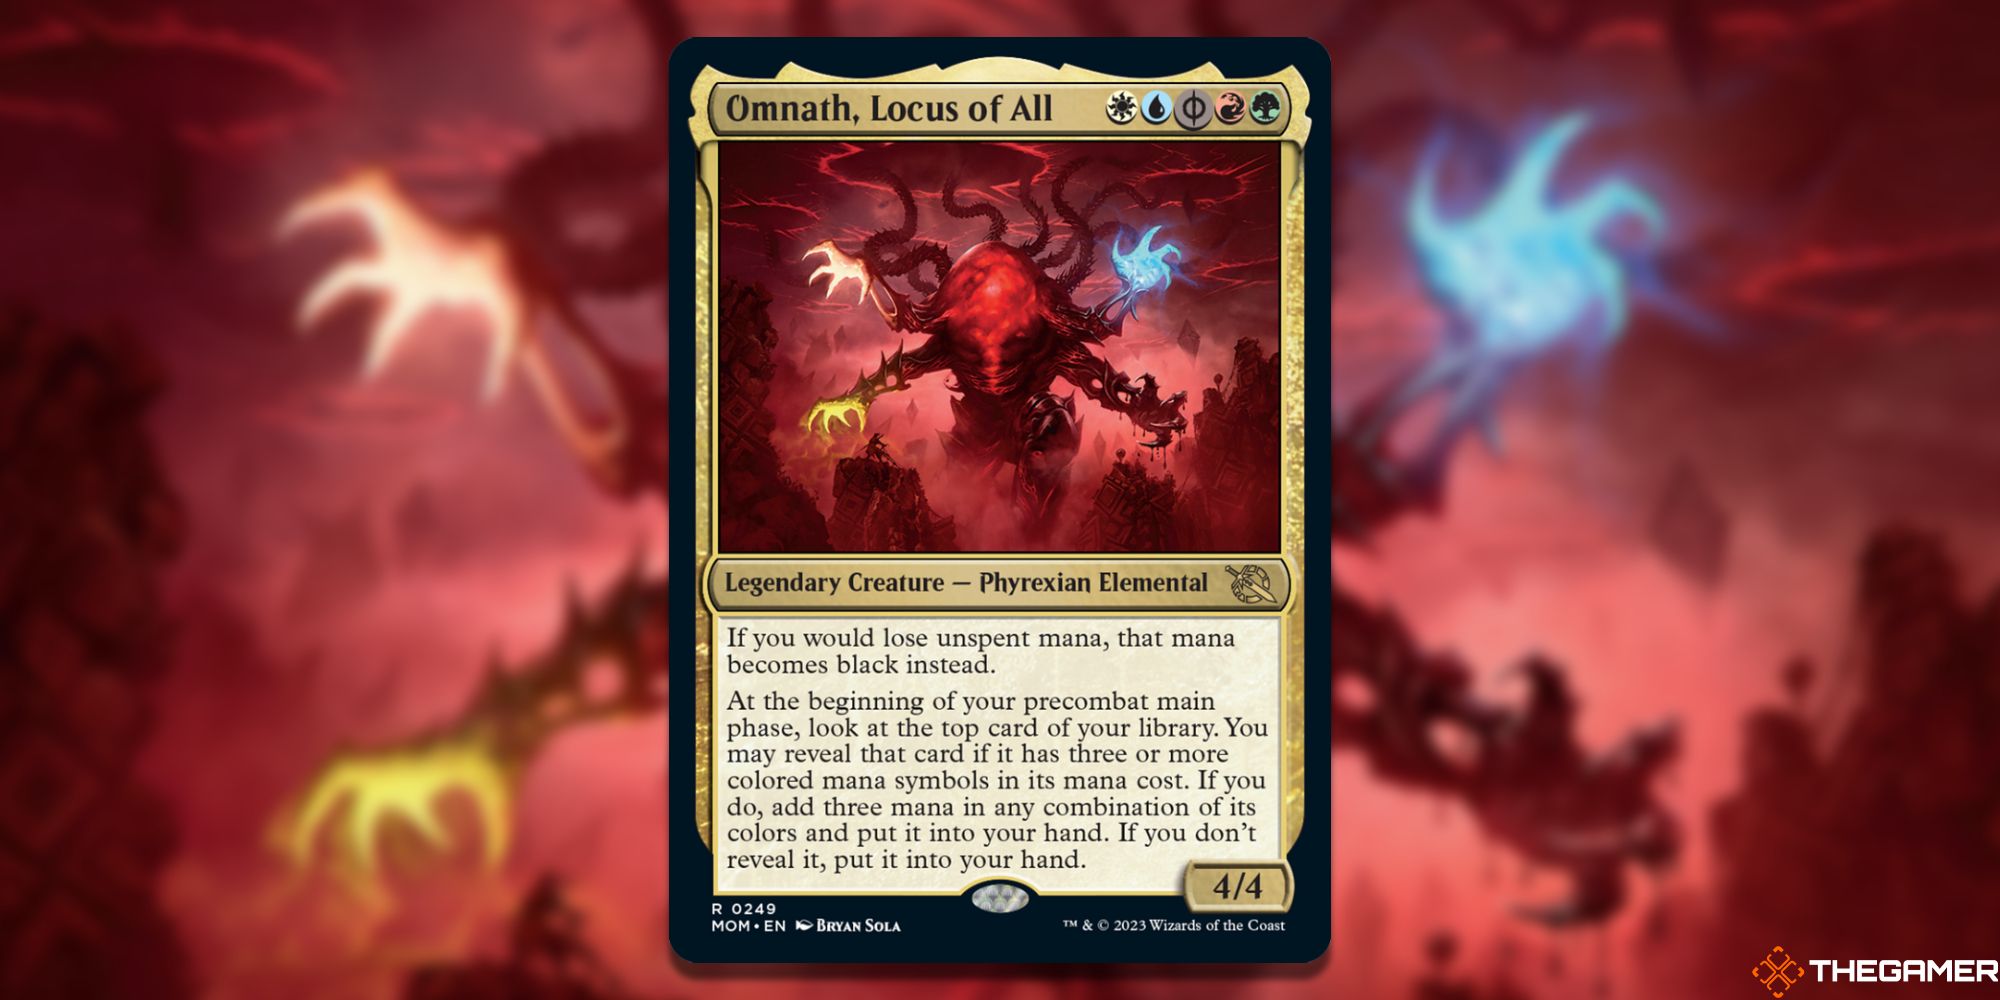 Omnath, a Locus of All card and artwork from Magic The Gathering.